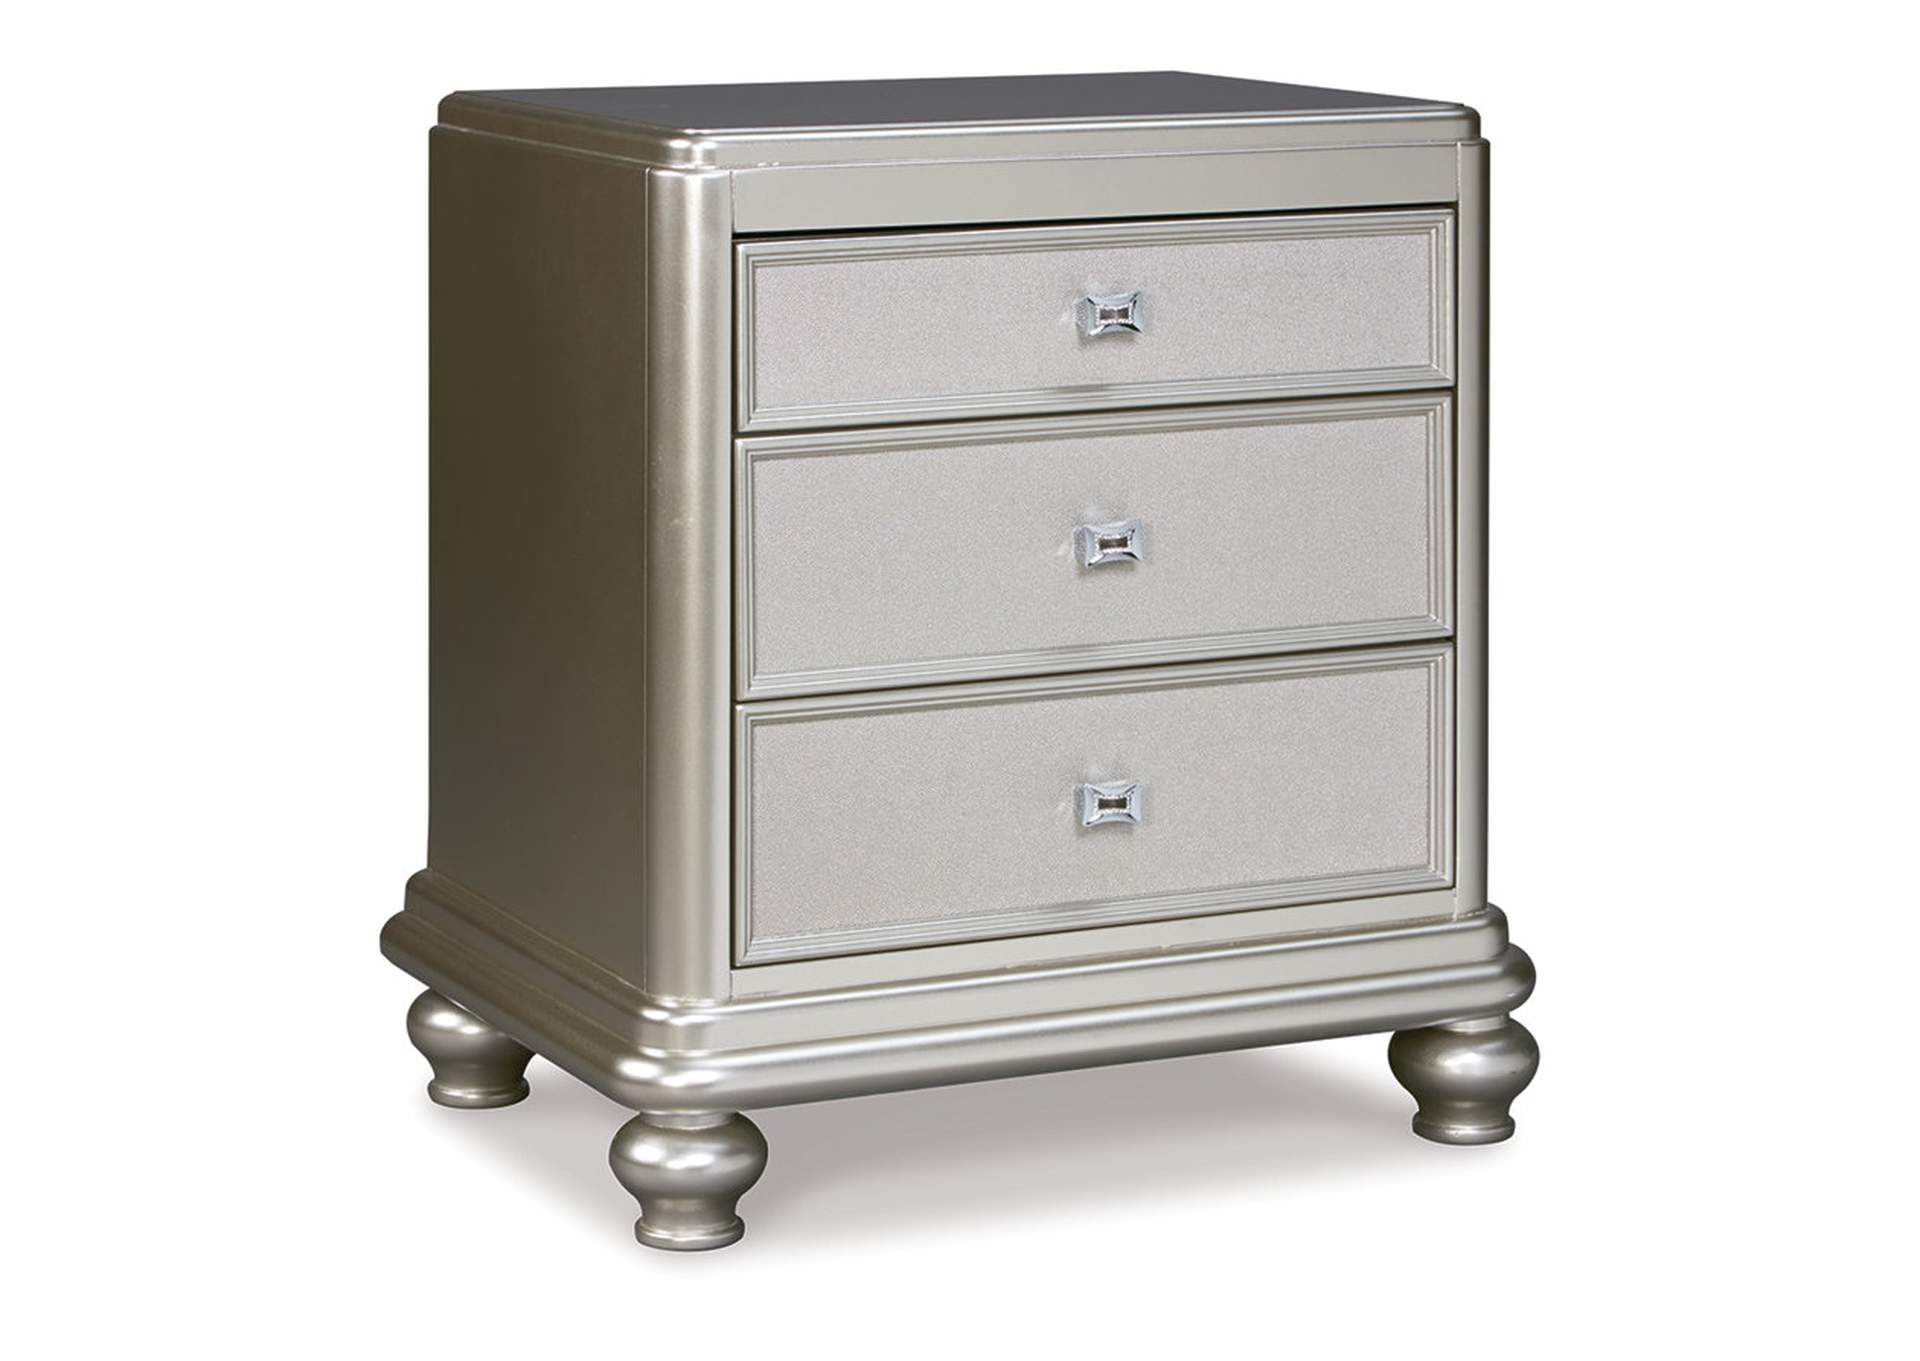 Coralayne Queen Upholstered Bed and Nightstand,Signature Design By Ashley